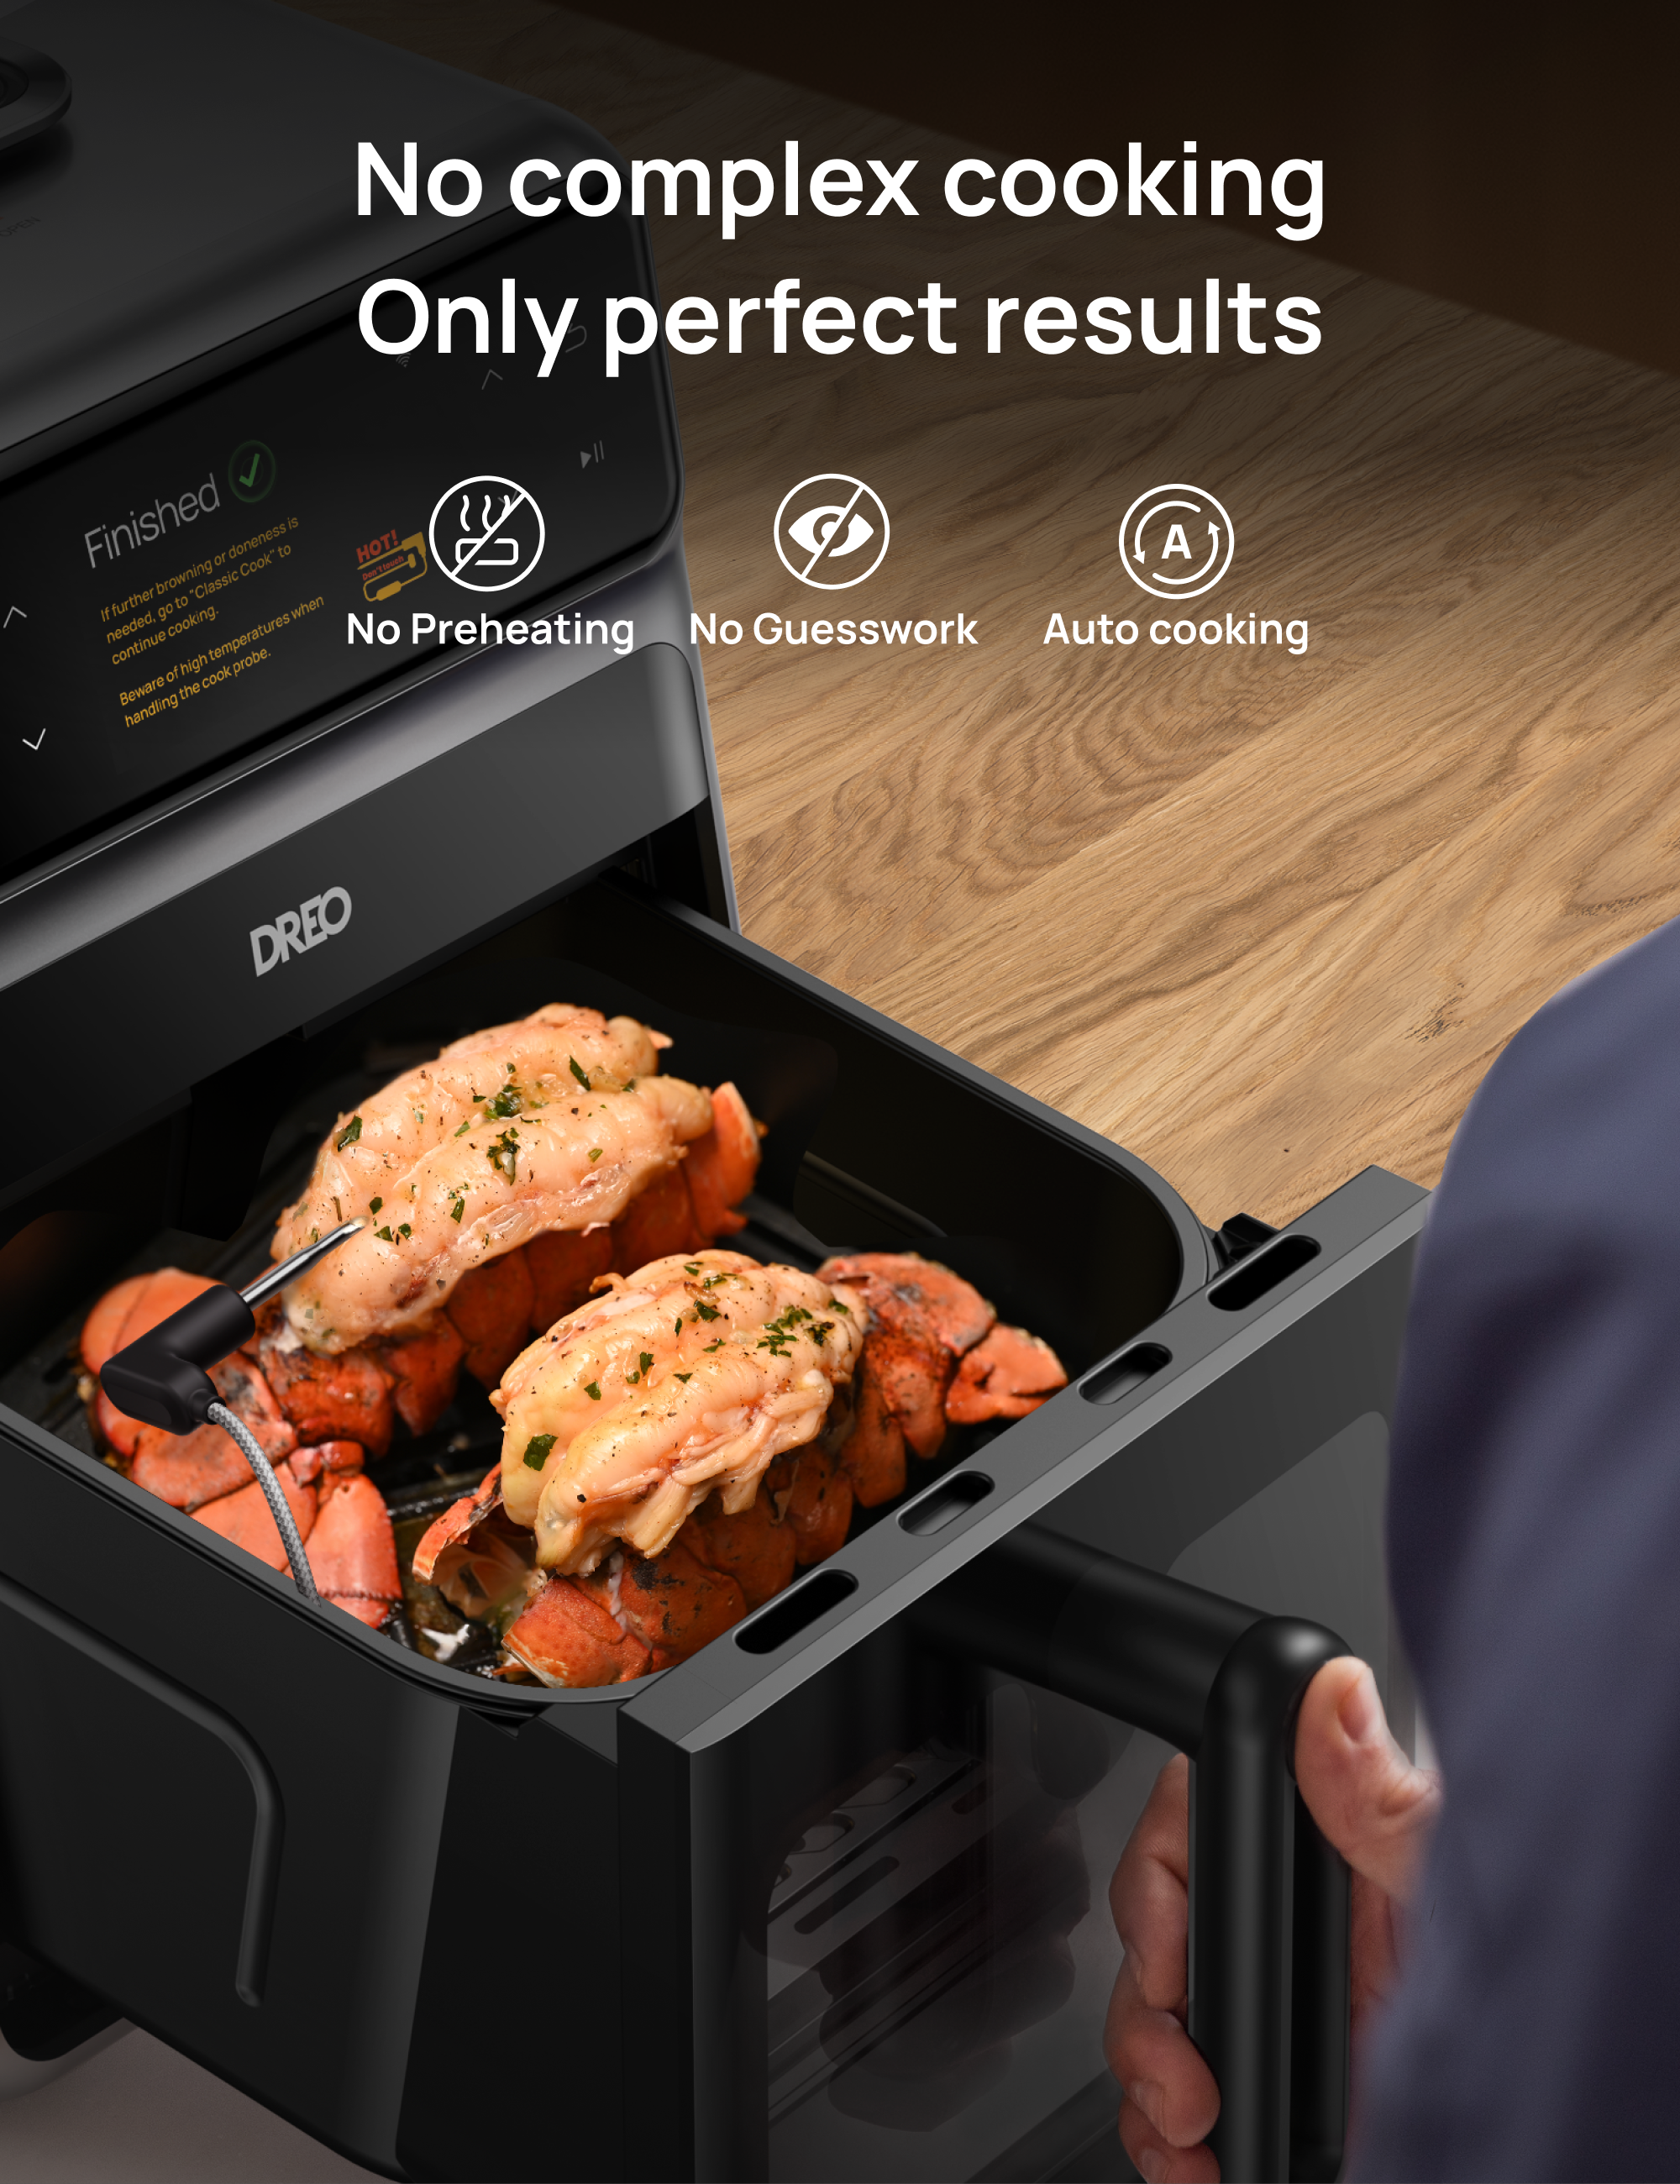 Dreo ChefMaker Combi Fryer, Cook like a pro with just the press of